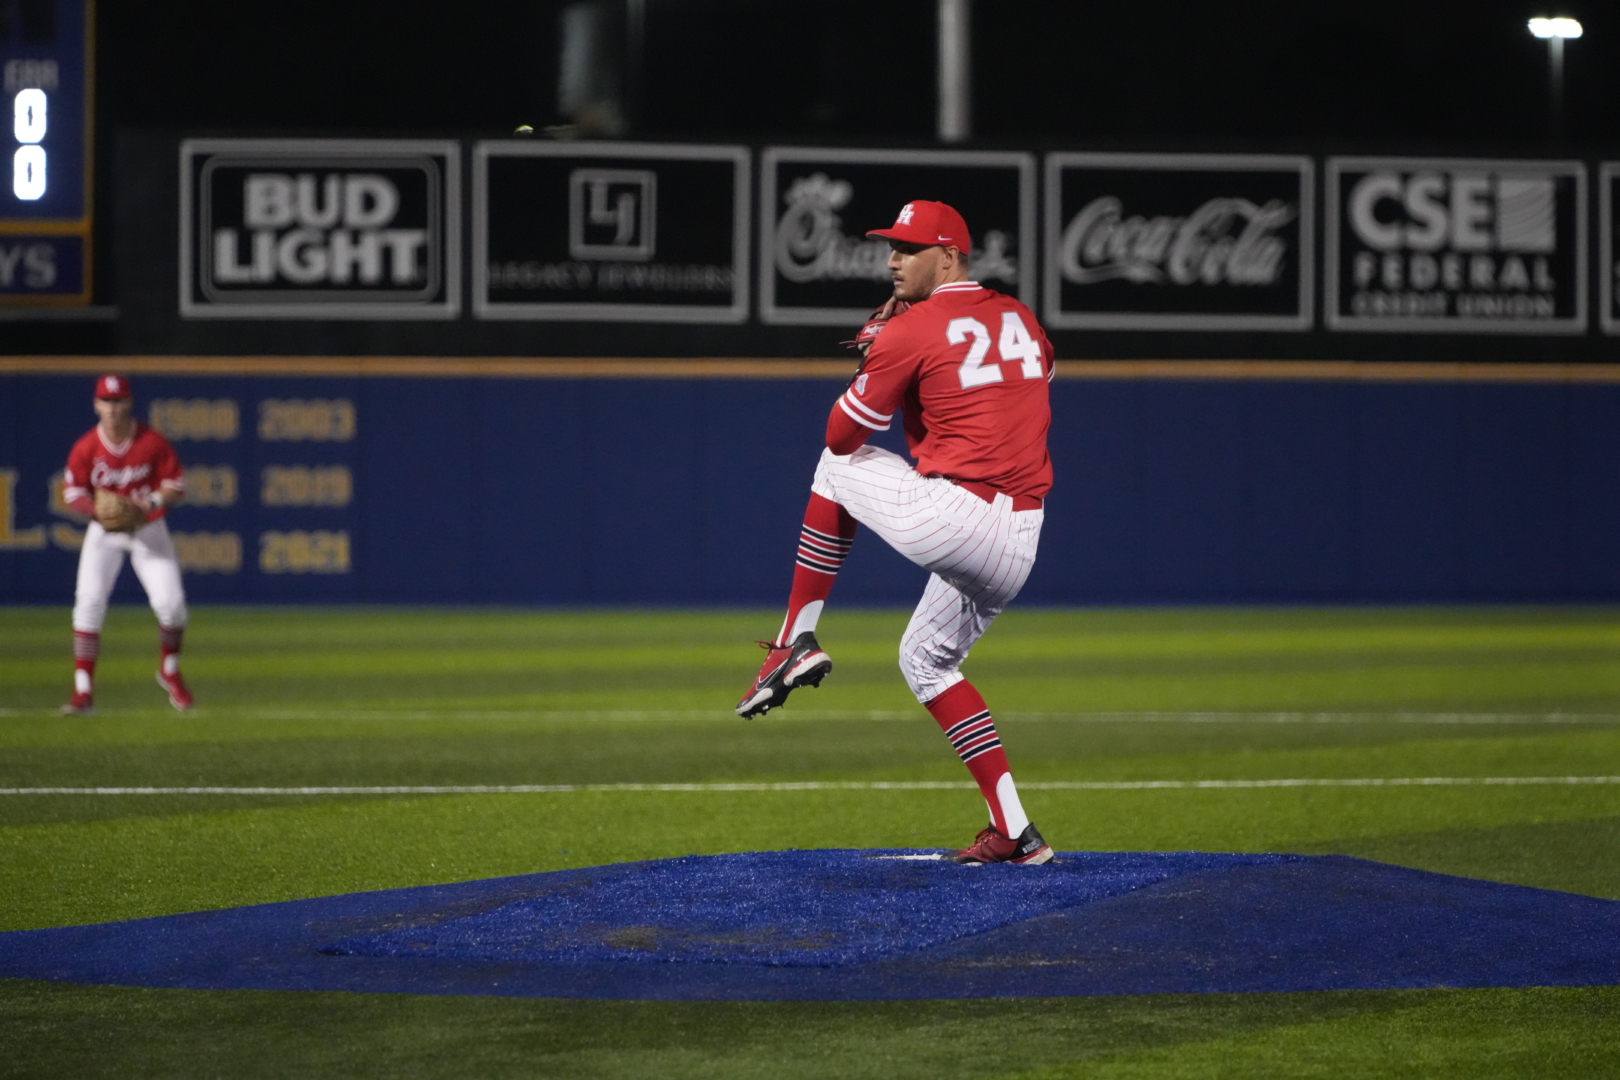 Junior right-handed pitcher Ben Sears struck out a career-high seven batters in UH baseball's win over McNeese on Tuesday night. | Courtesy of UH athletics